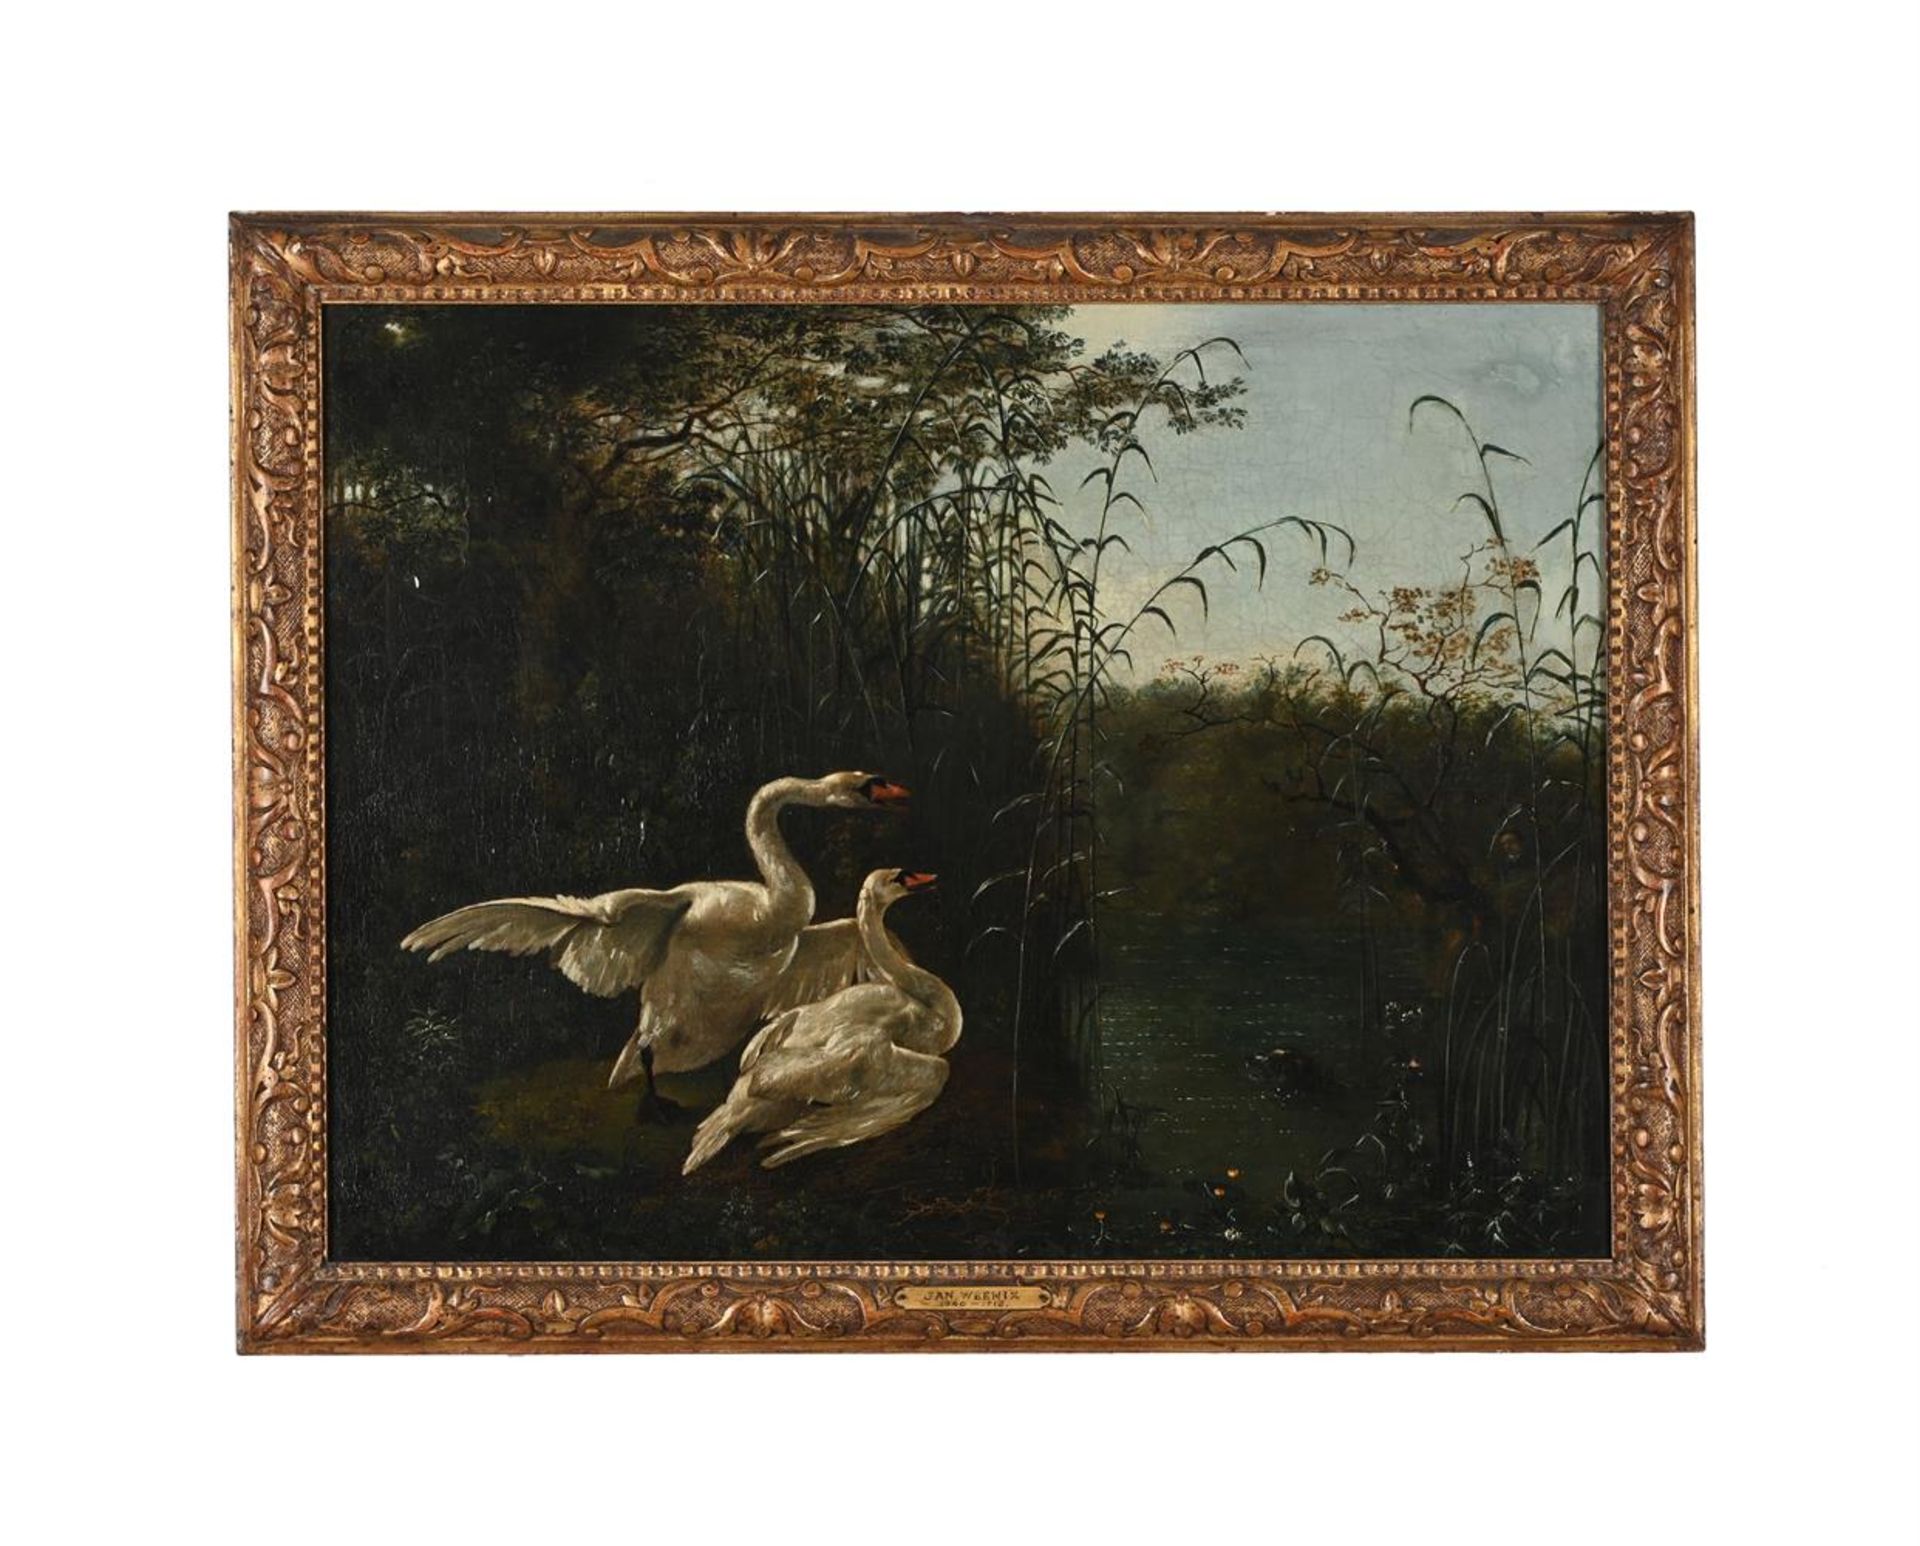 FOLLOWER OF JAN WEENIX, TWO SWANS DISTURBED BY A DOG - Image 2 of 3